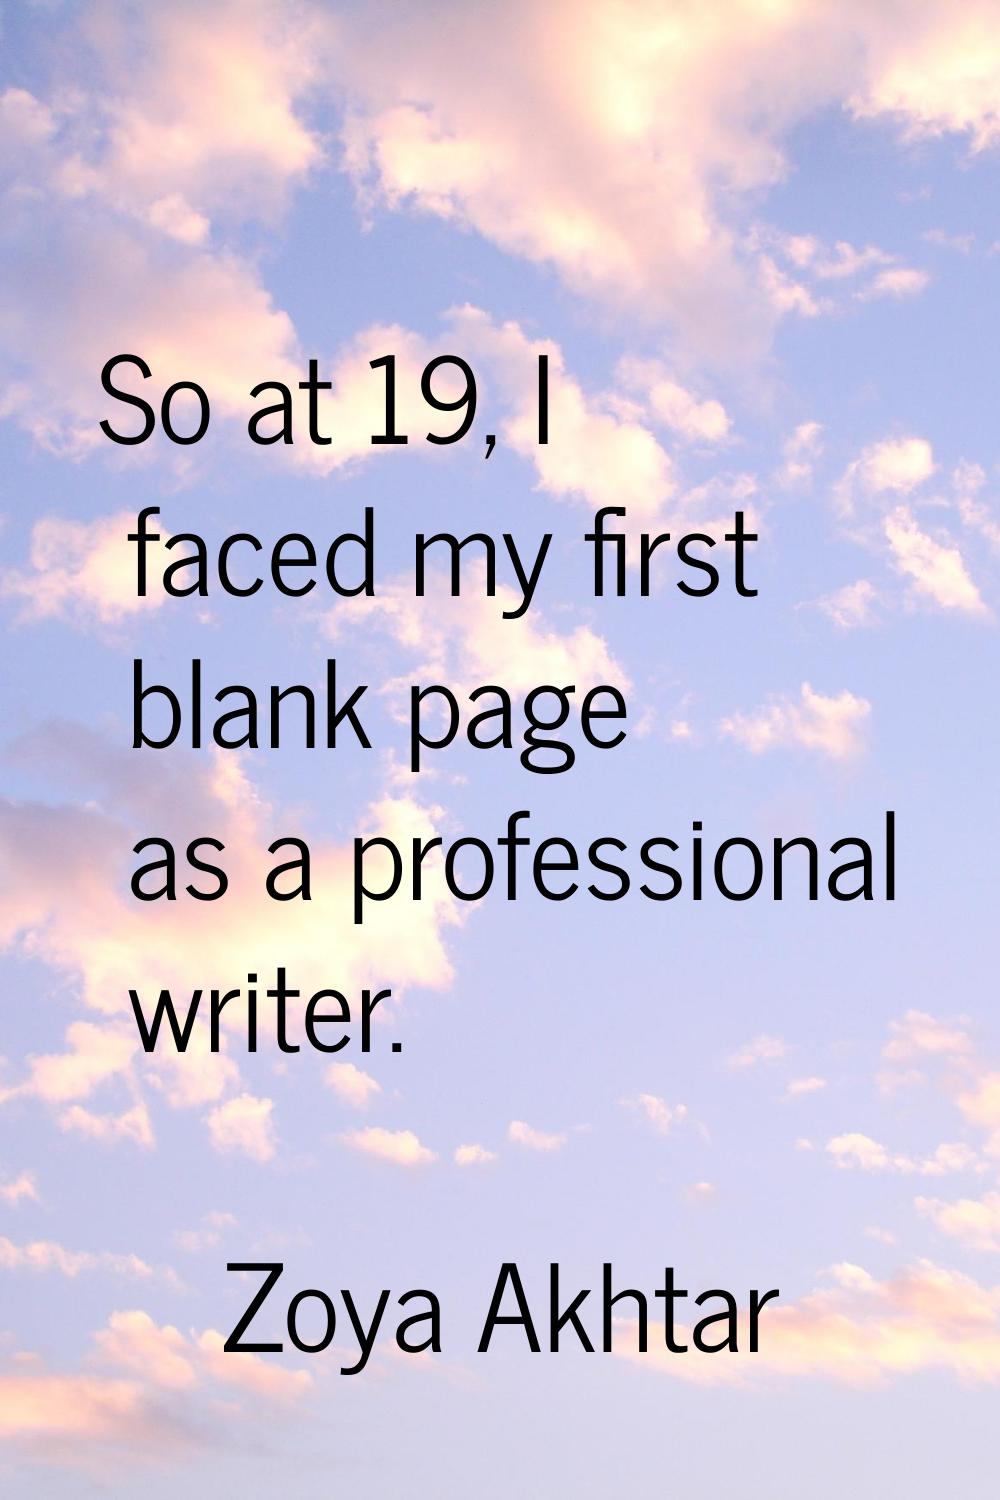 So at 19, I faced my first blank page as a professional writer.